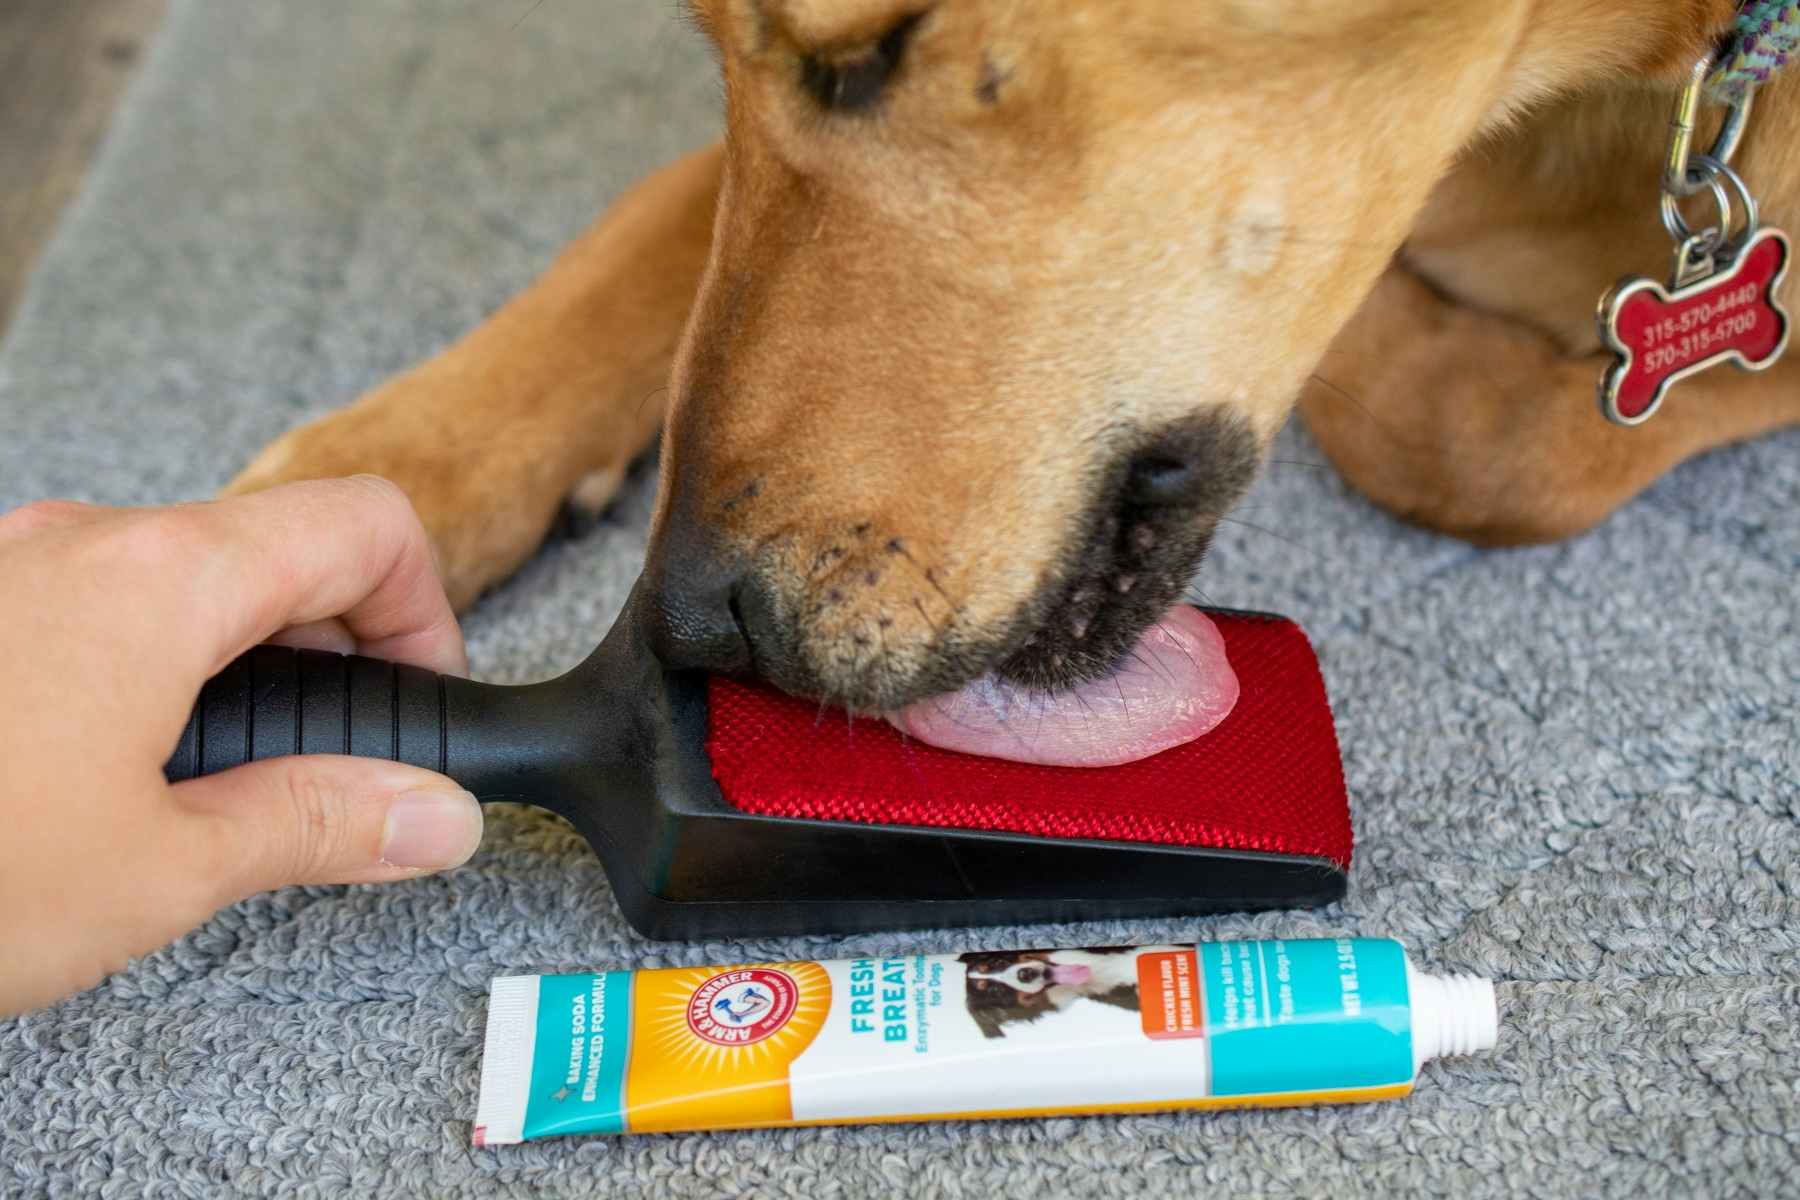 Freshen breath by applying doggy toothpaste to a lint remover, then have your dog lick it off.